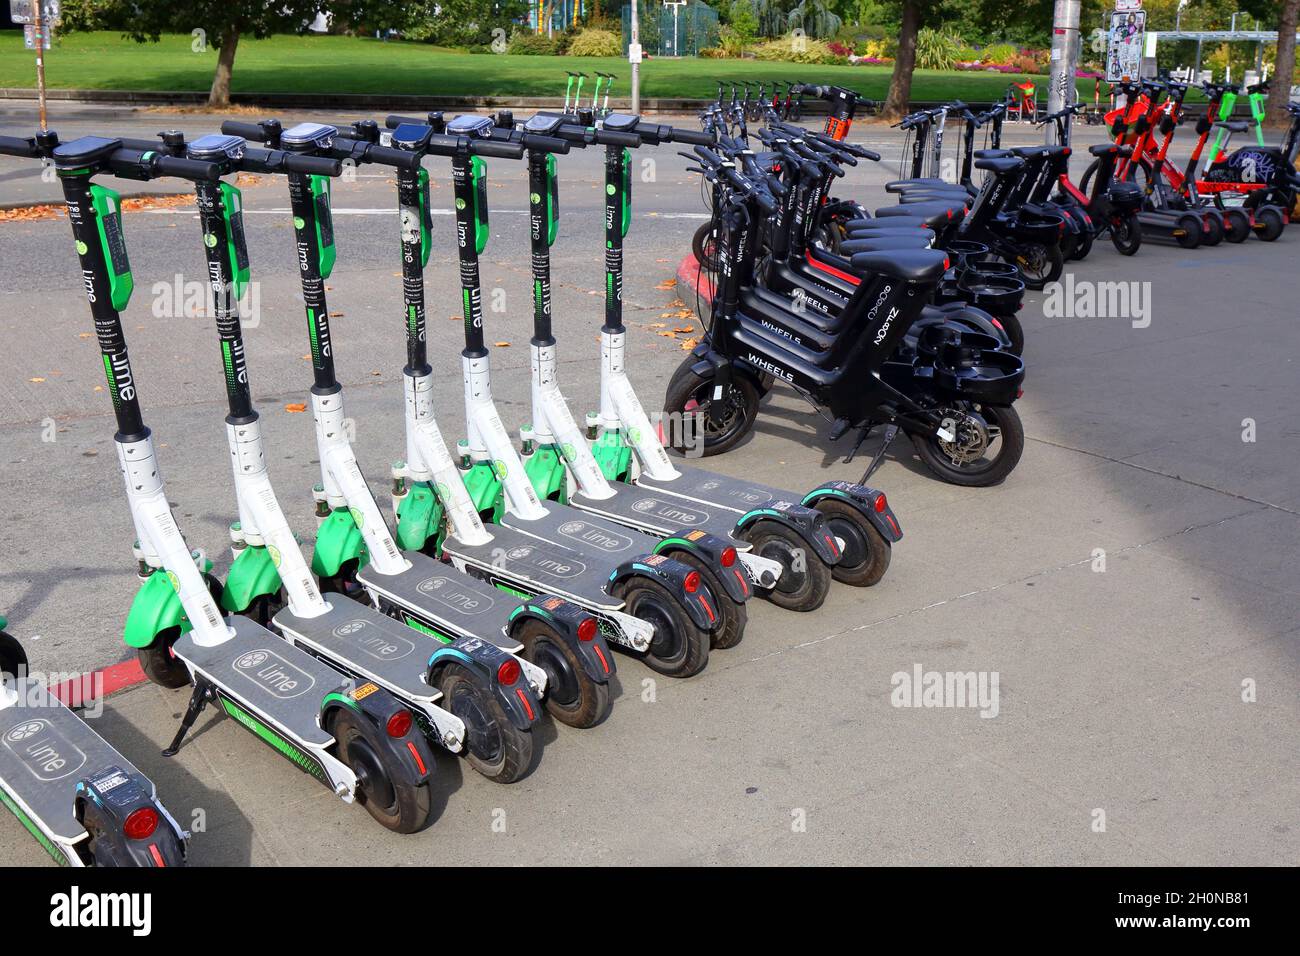 Dozens of rental electric scooters and e-bikes lined up on a Seattle sidewalk offering Lime e-scooters, Wheels rental e-bikes, and Spin e-scooters. Stock Photo